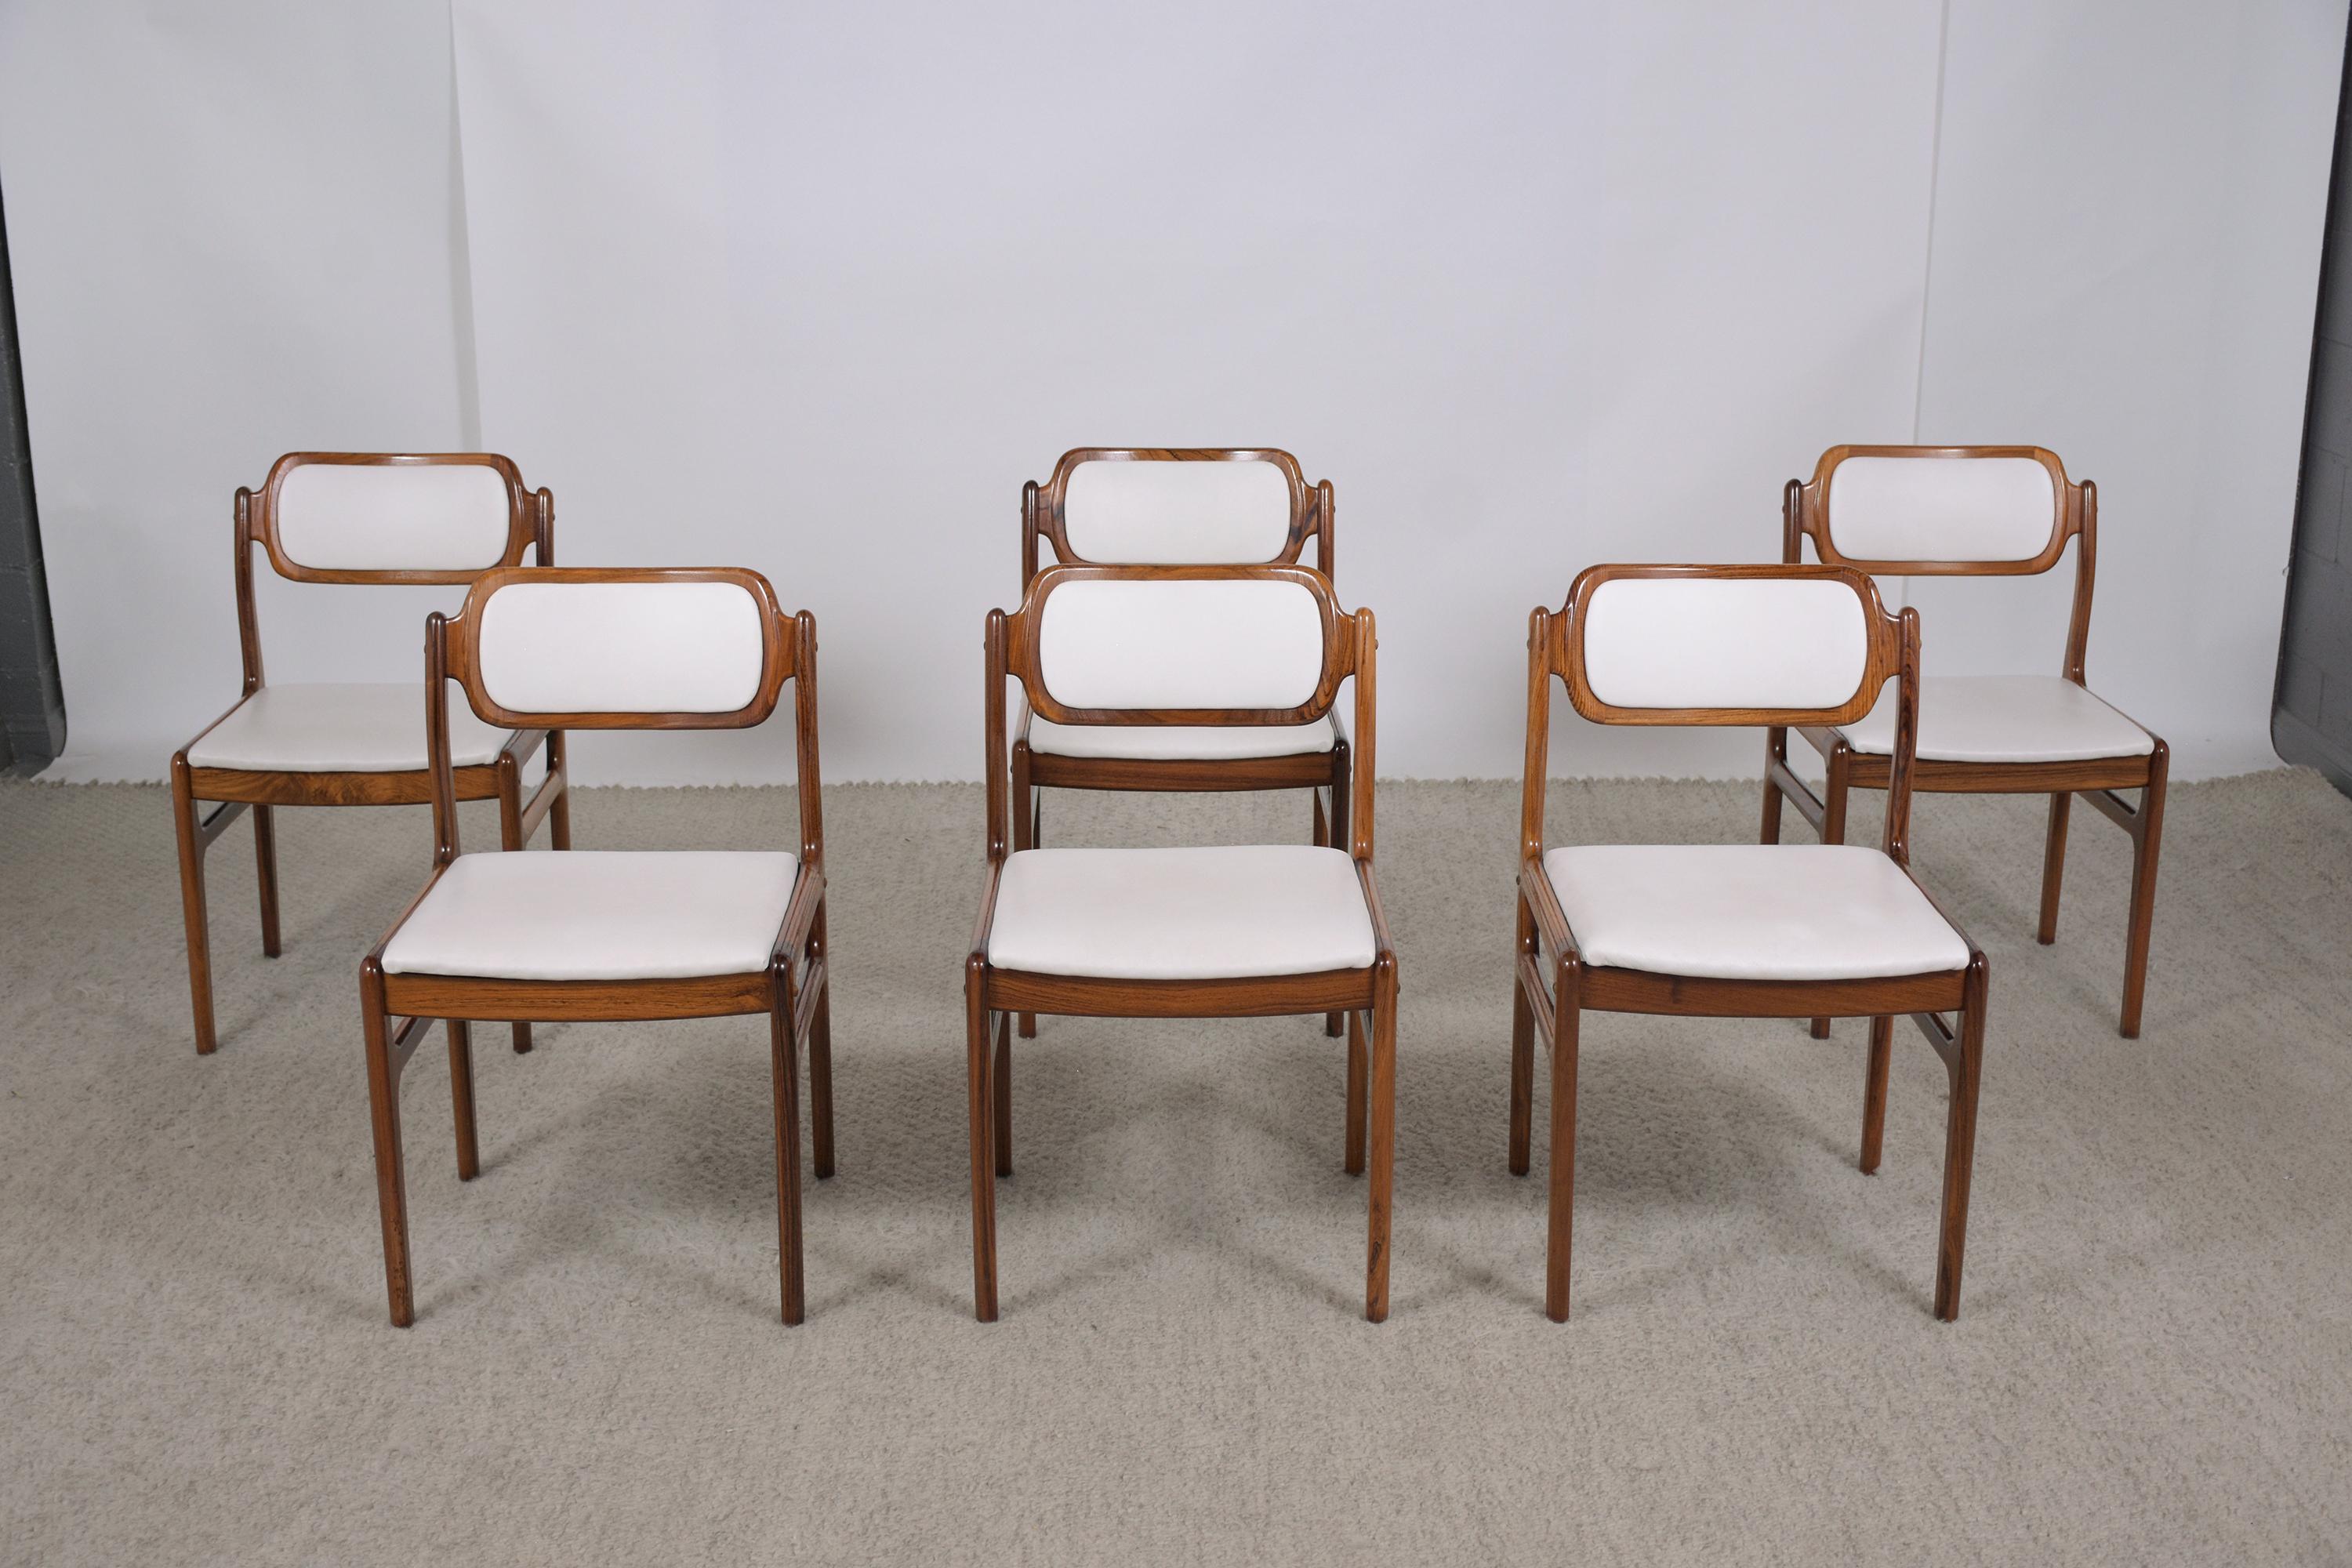 An extraordinary set of six danish modern dining chairs beautiful crated out rosewood in great condition completed restored by our professional craftsmen team. This fabulous vintage set of chairs features a solid sturdy carved frame stained in